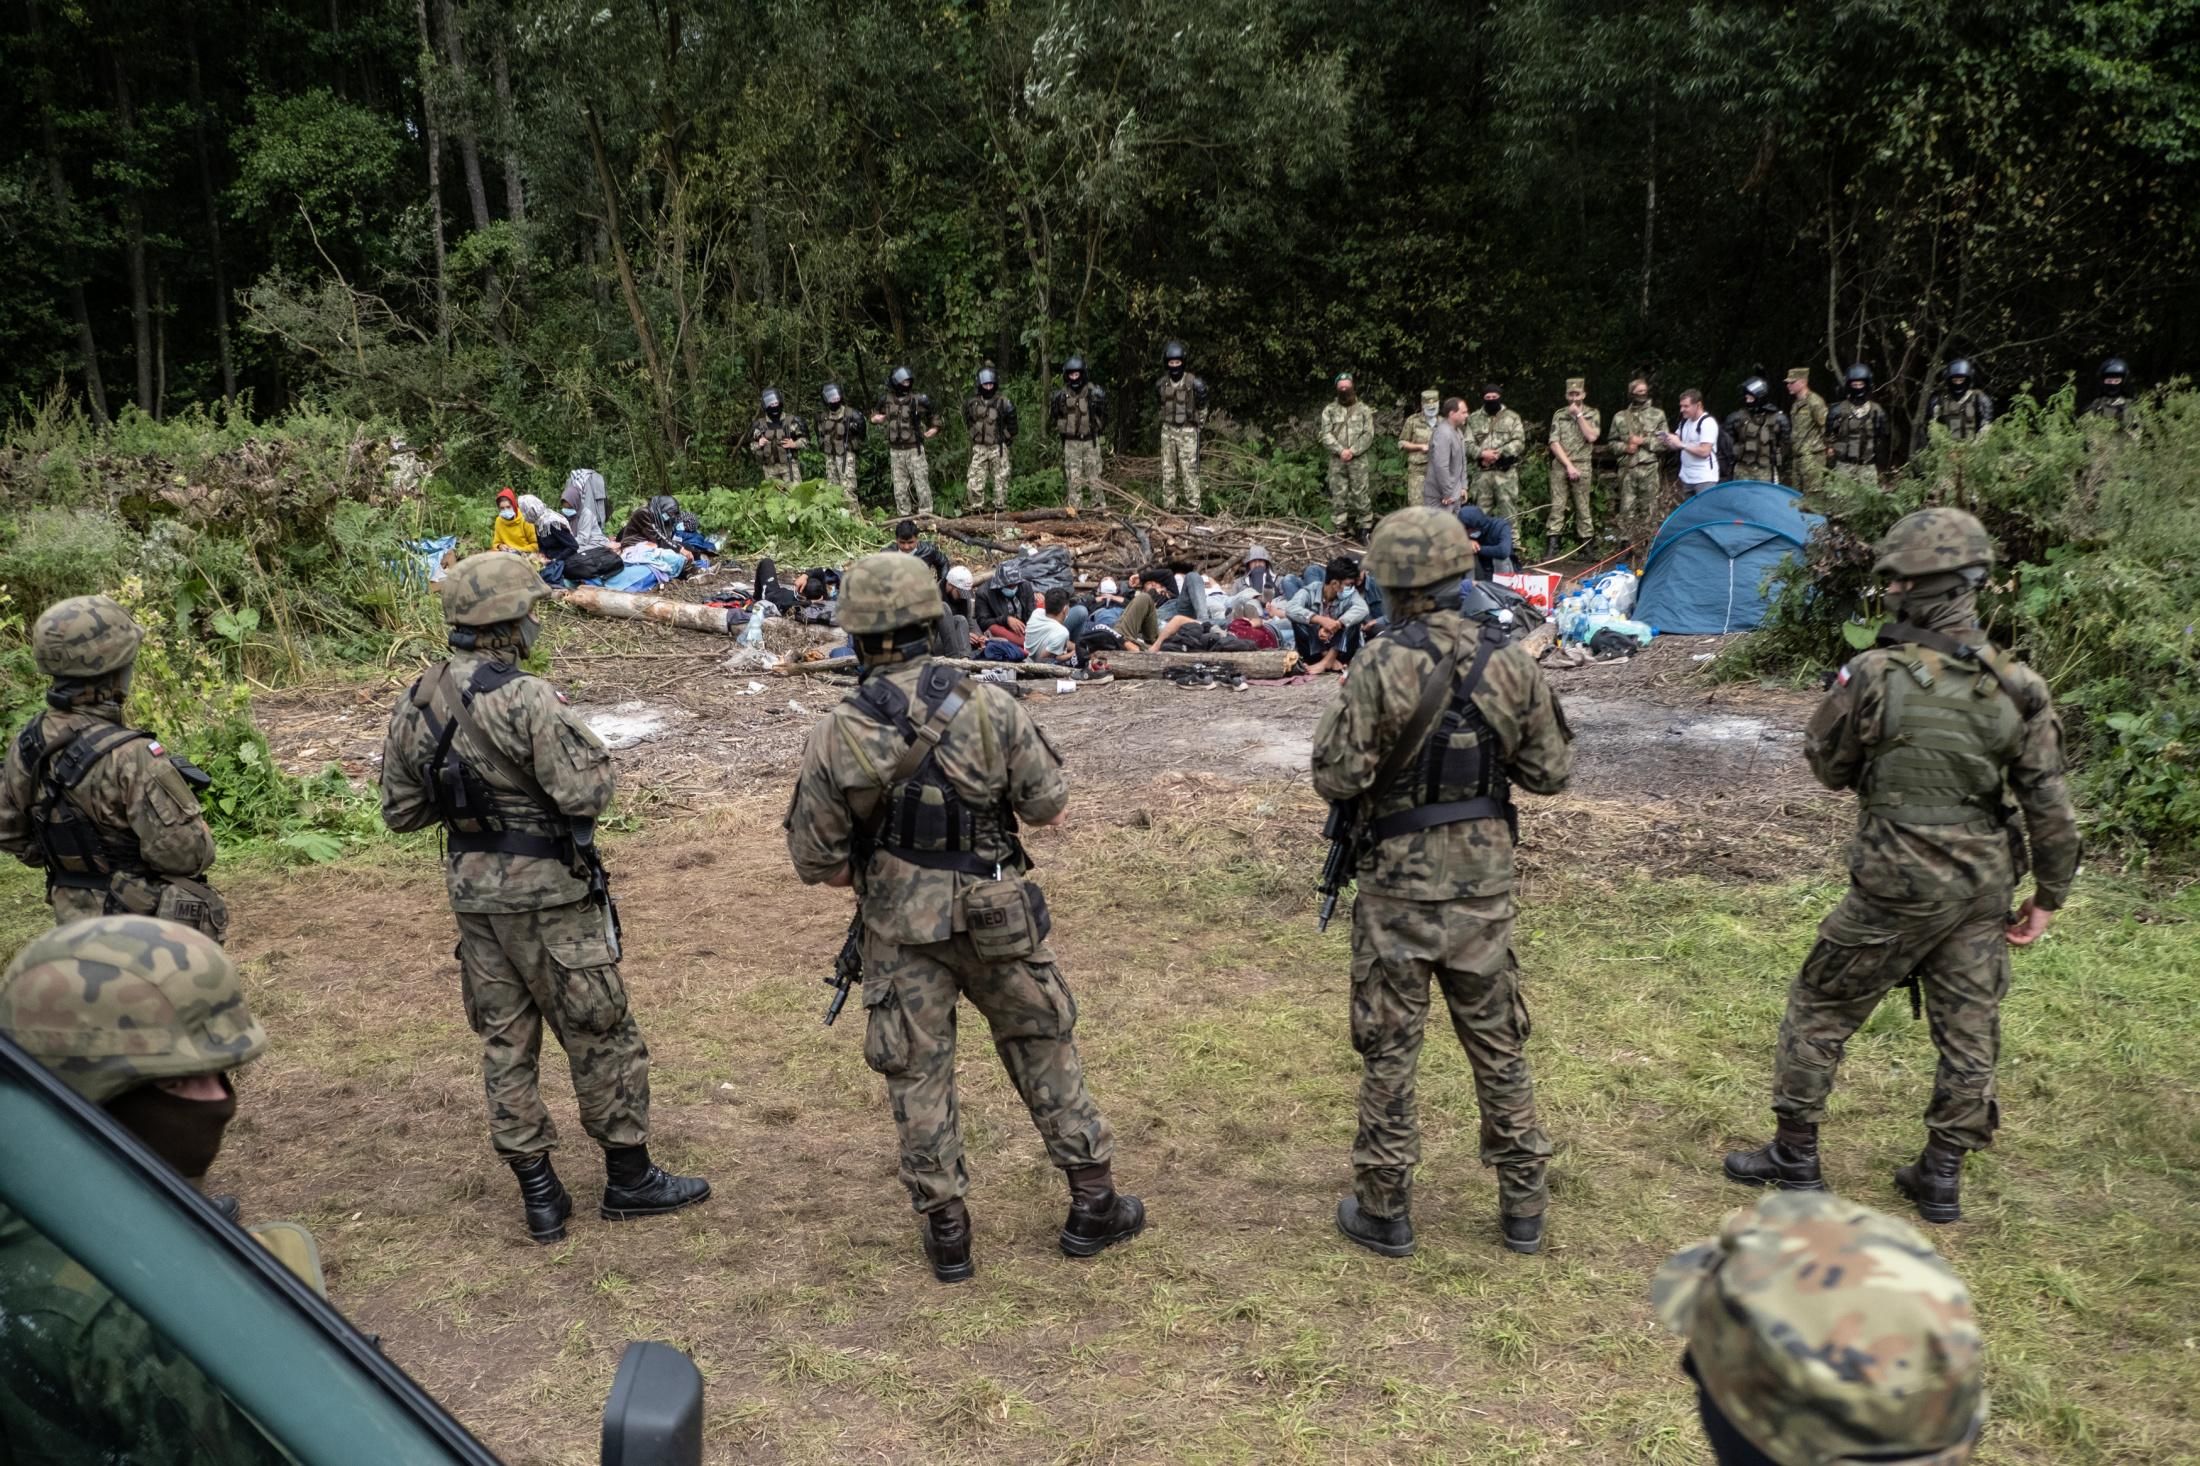 Afghan refugees are surrounded by security forces at the Poland-Belarus border on August 26, 2021. The group of migrants from Afghanistan has been stuck at the E.U.'s eastern border for several weeks as Belarus and Poland both refuse to let them in. (Photo: Maciej Moskwa/NurPhoto via Getty Images)